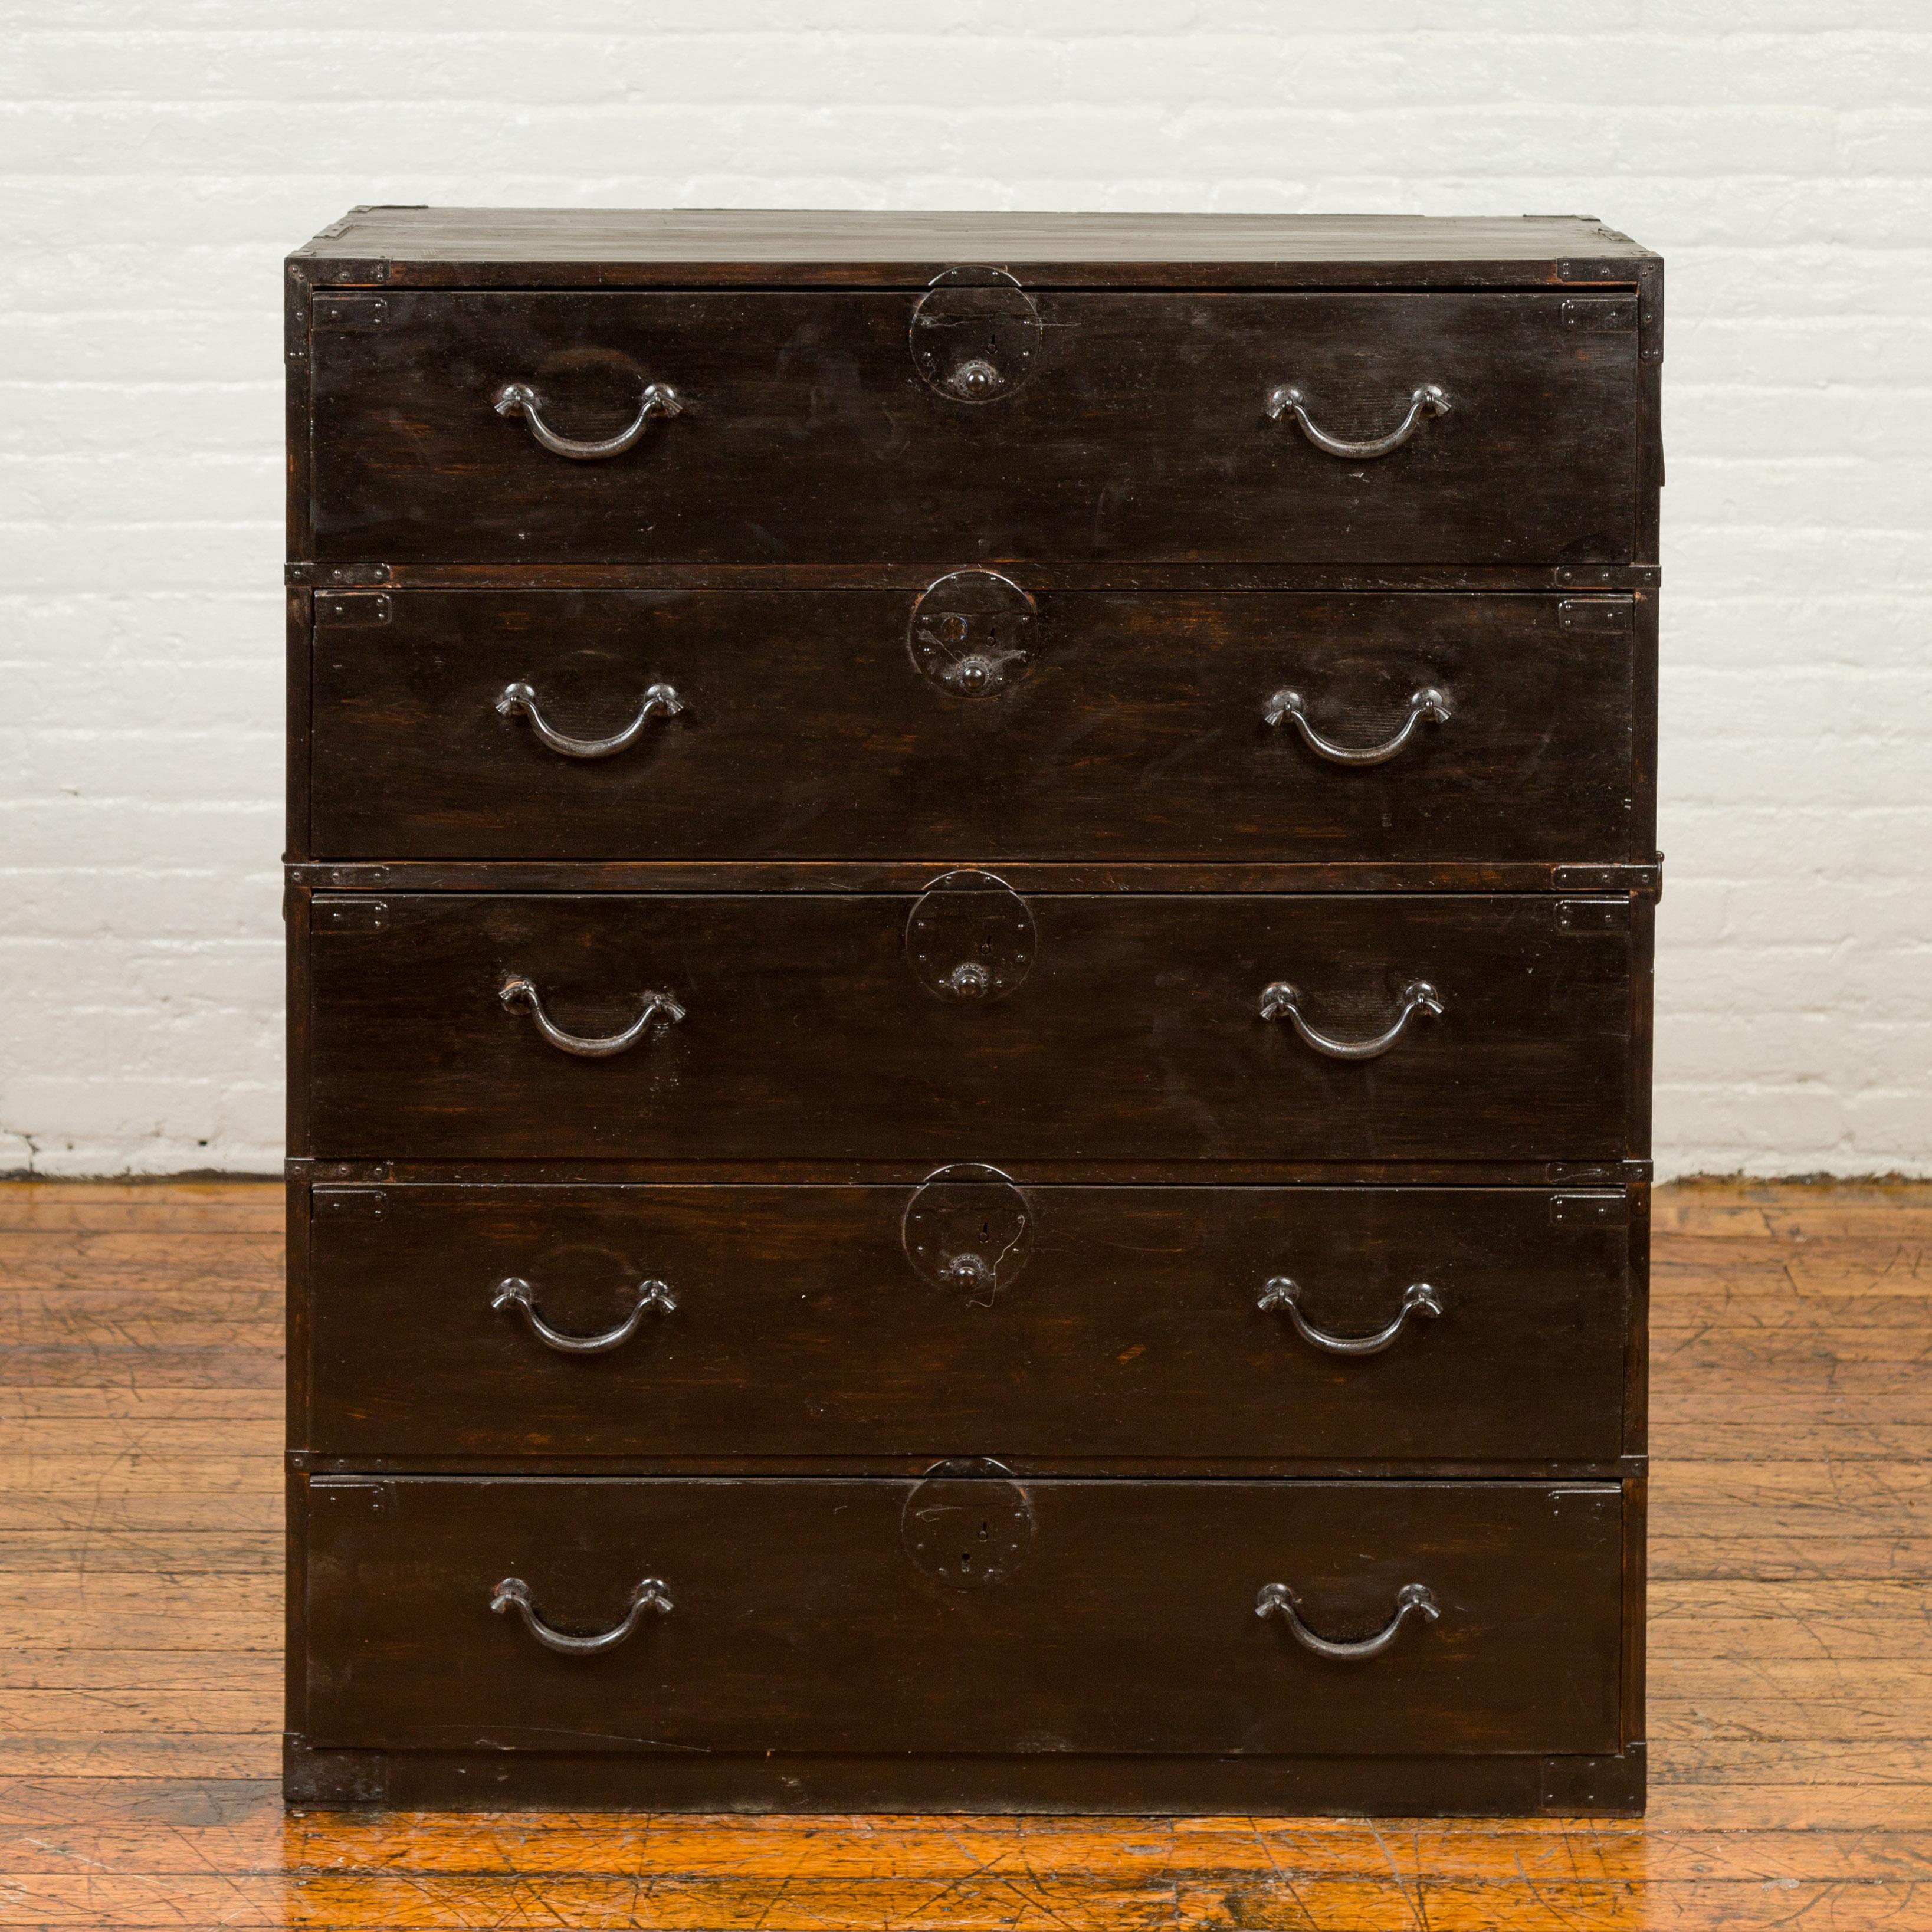 A tall Japanese Meiji period tansu clothing chest from the 19th century, with five drawers, dark patina and iron hardware. Born in Japan during the Meiji period, this single section tansu traveling chest features a rectangular top sitting above five